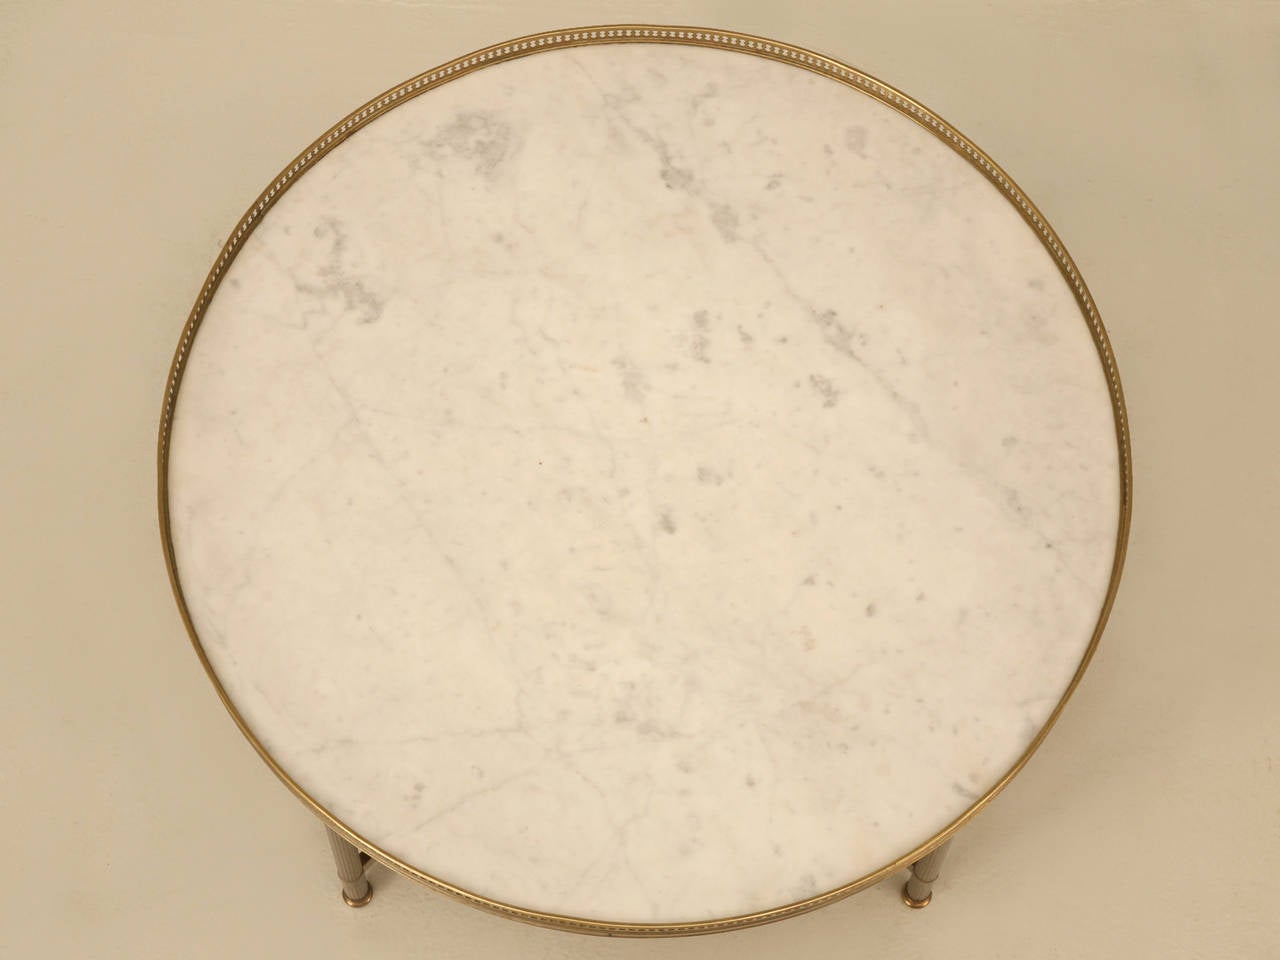 Vintage French round marble top coffee, or cocktail table with brass base. Done in a neoclassical style with a brass gallery edge banding. Marble is in very nice condition with no visible cracks or repairs.
The height provided includes the 3/4